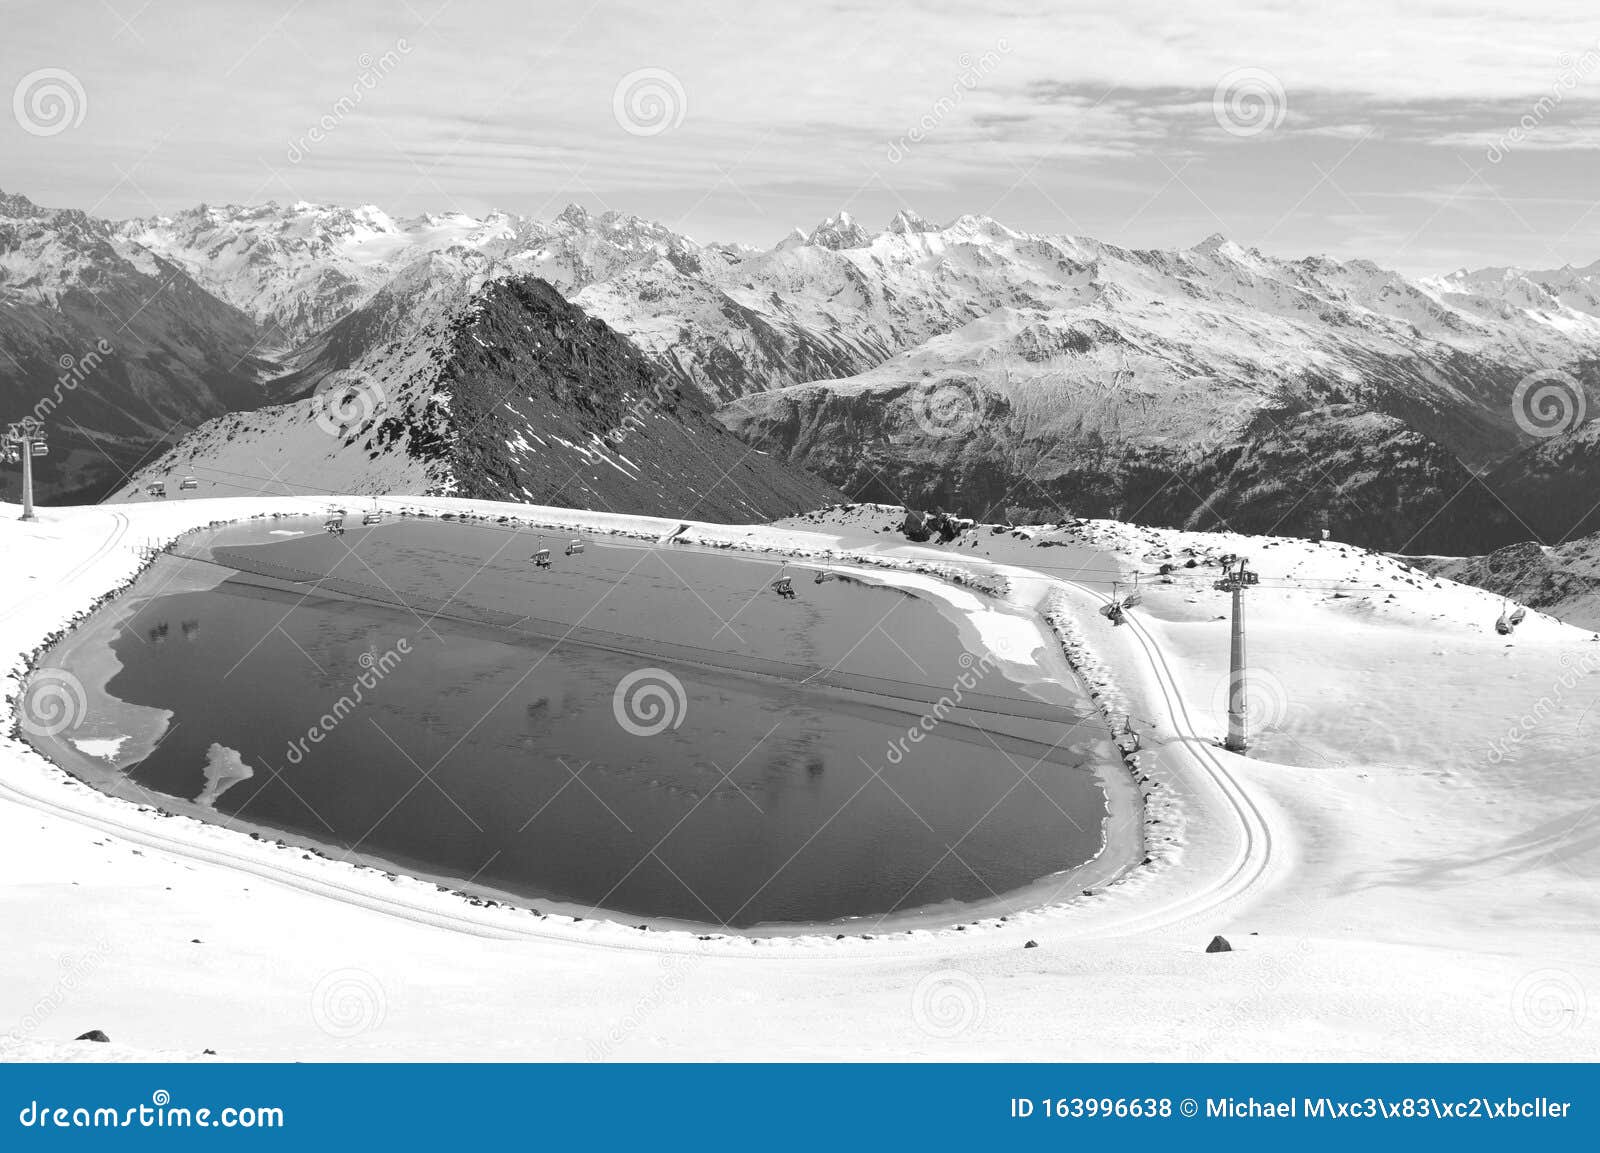 lake for feeding the snow machines in the swiss alps at parsenn in davos